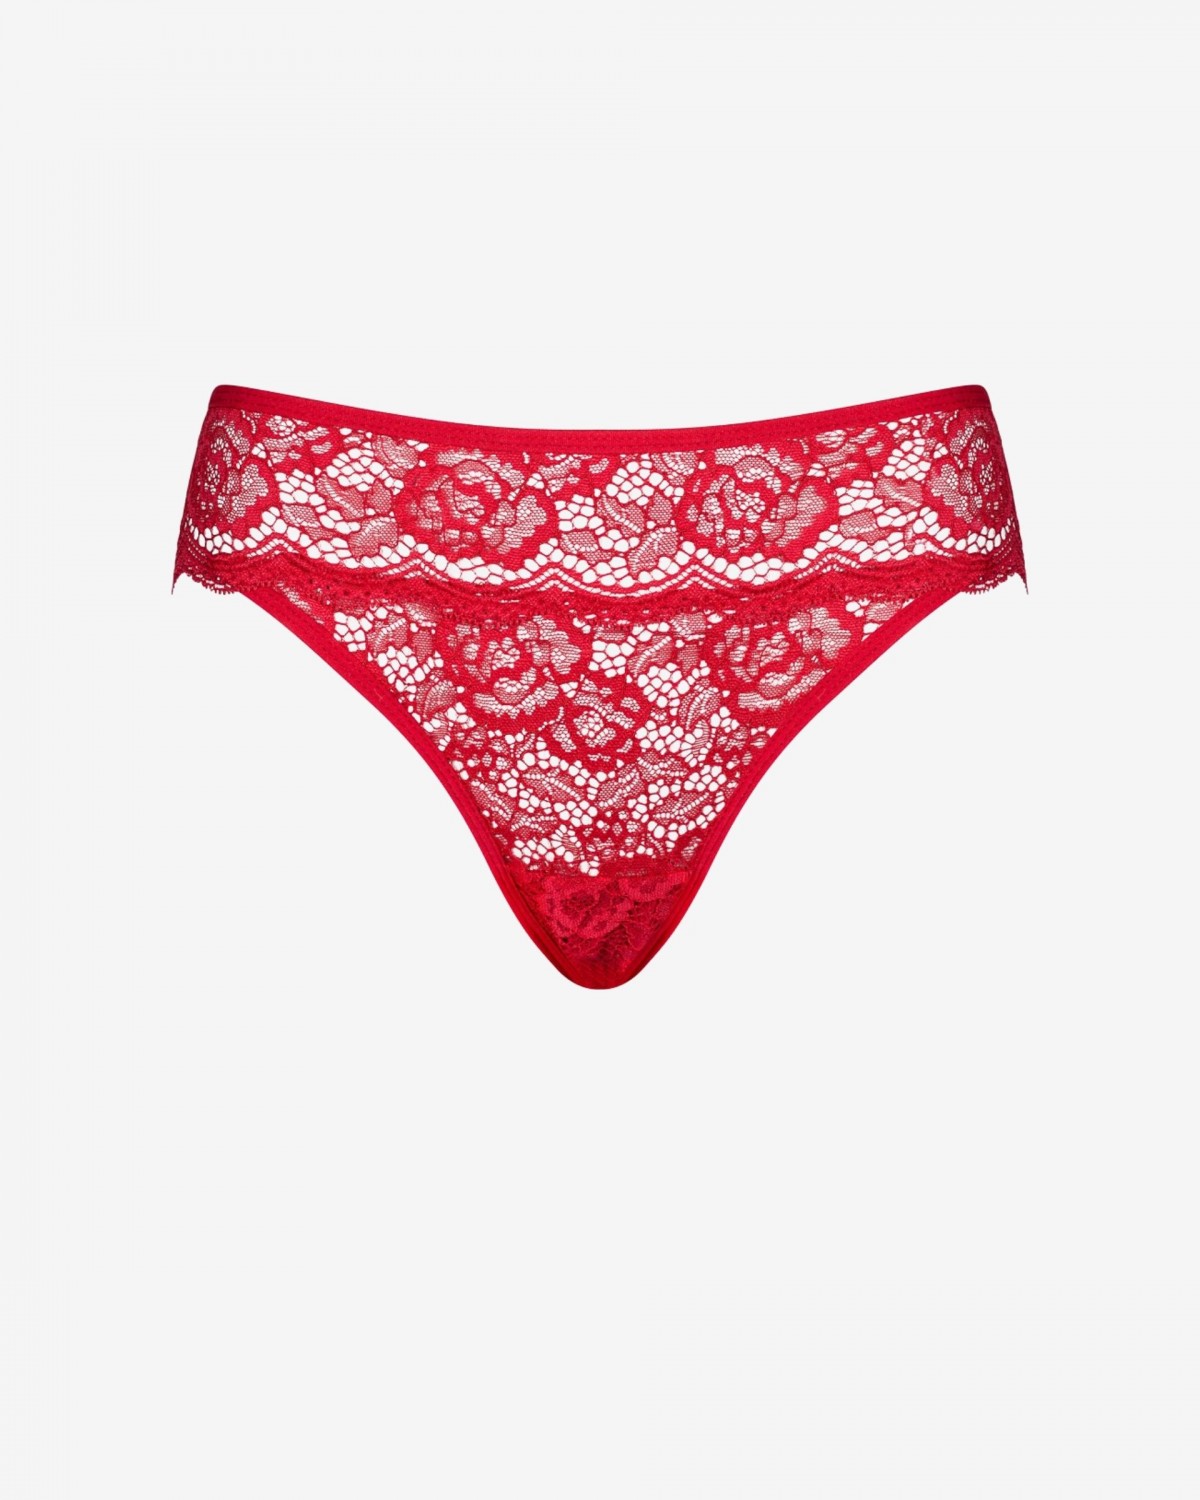 Gisele Red lace panties